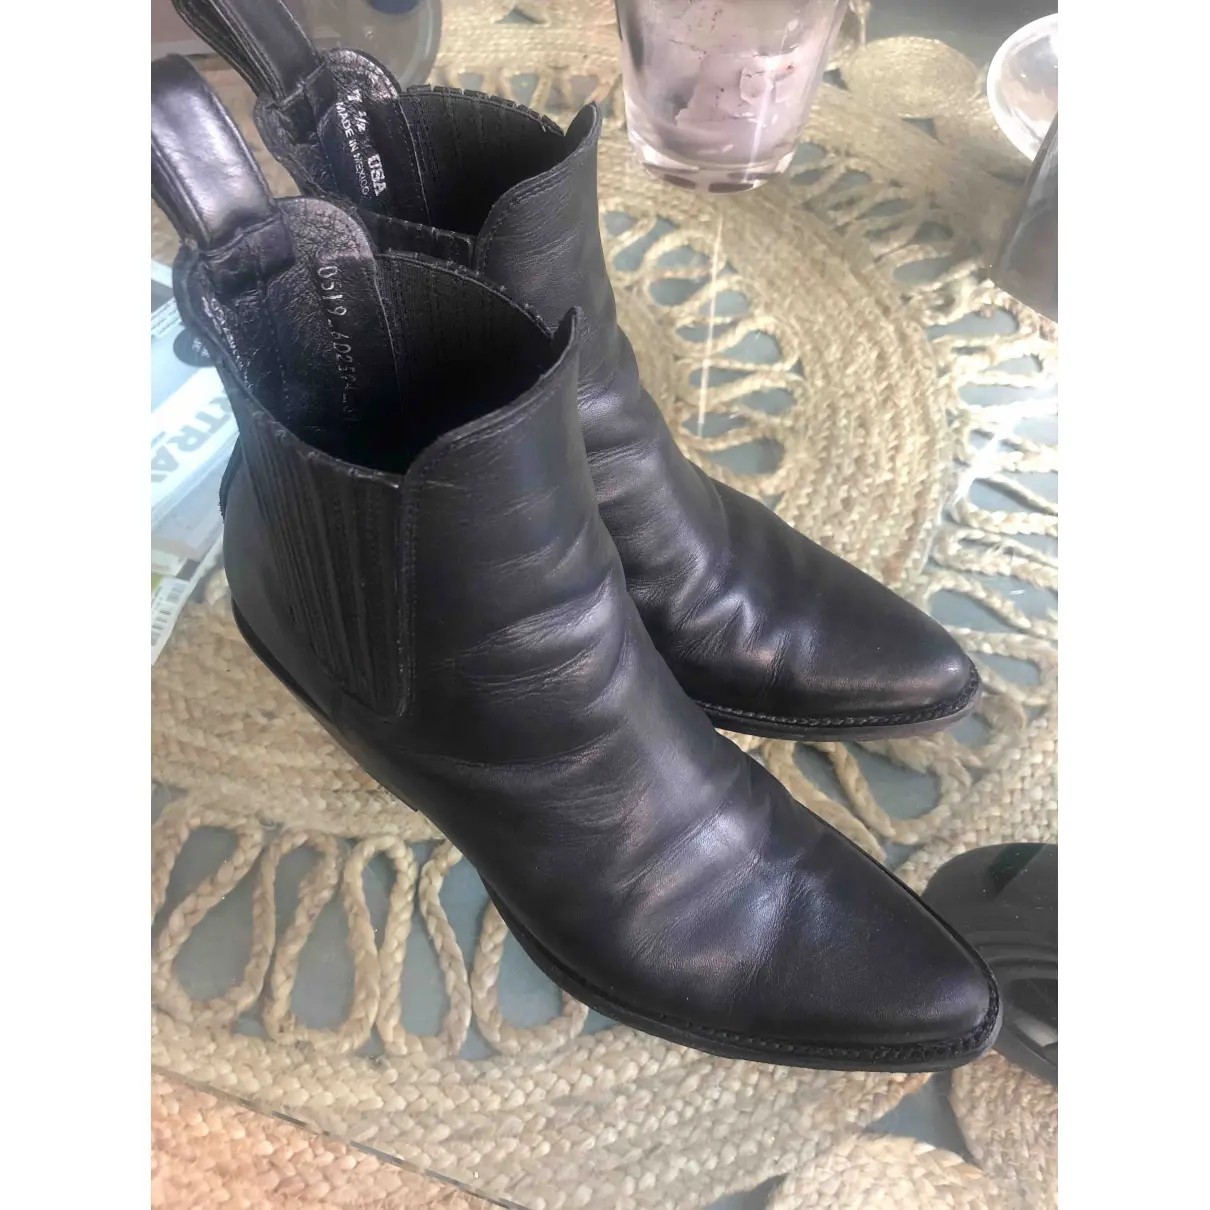 Mexicana Leather western boots for sale